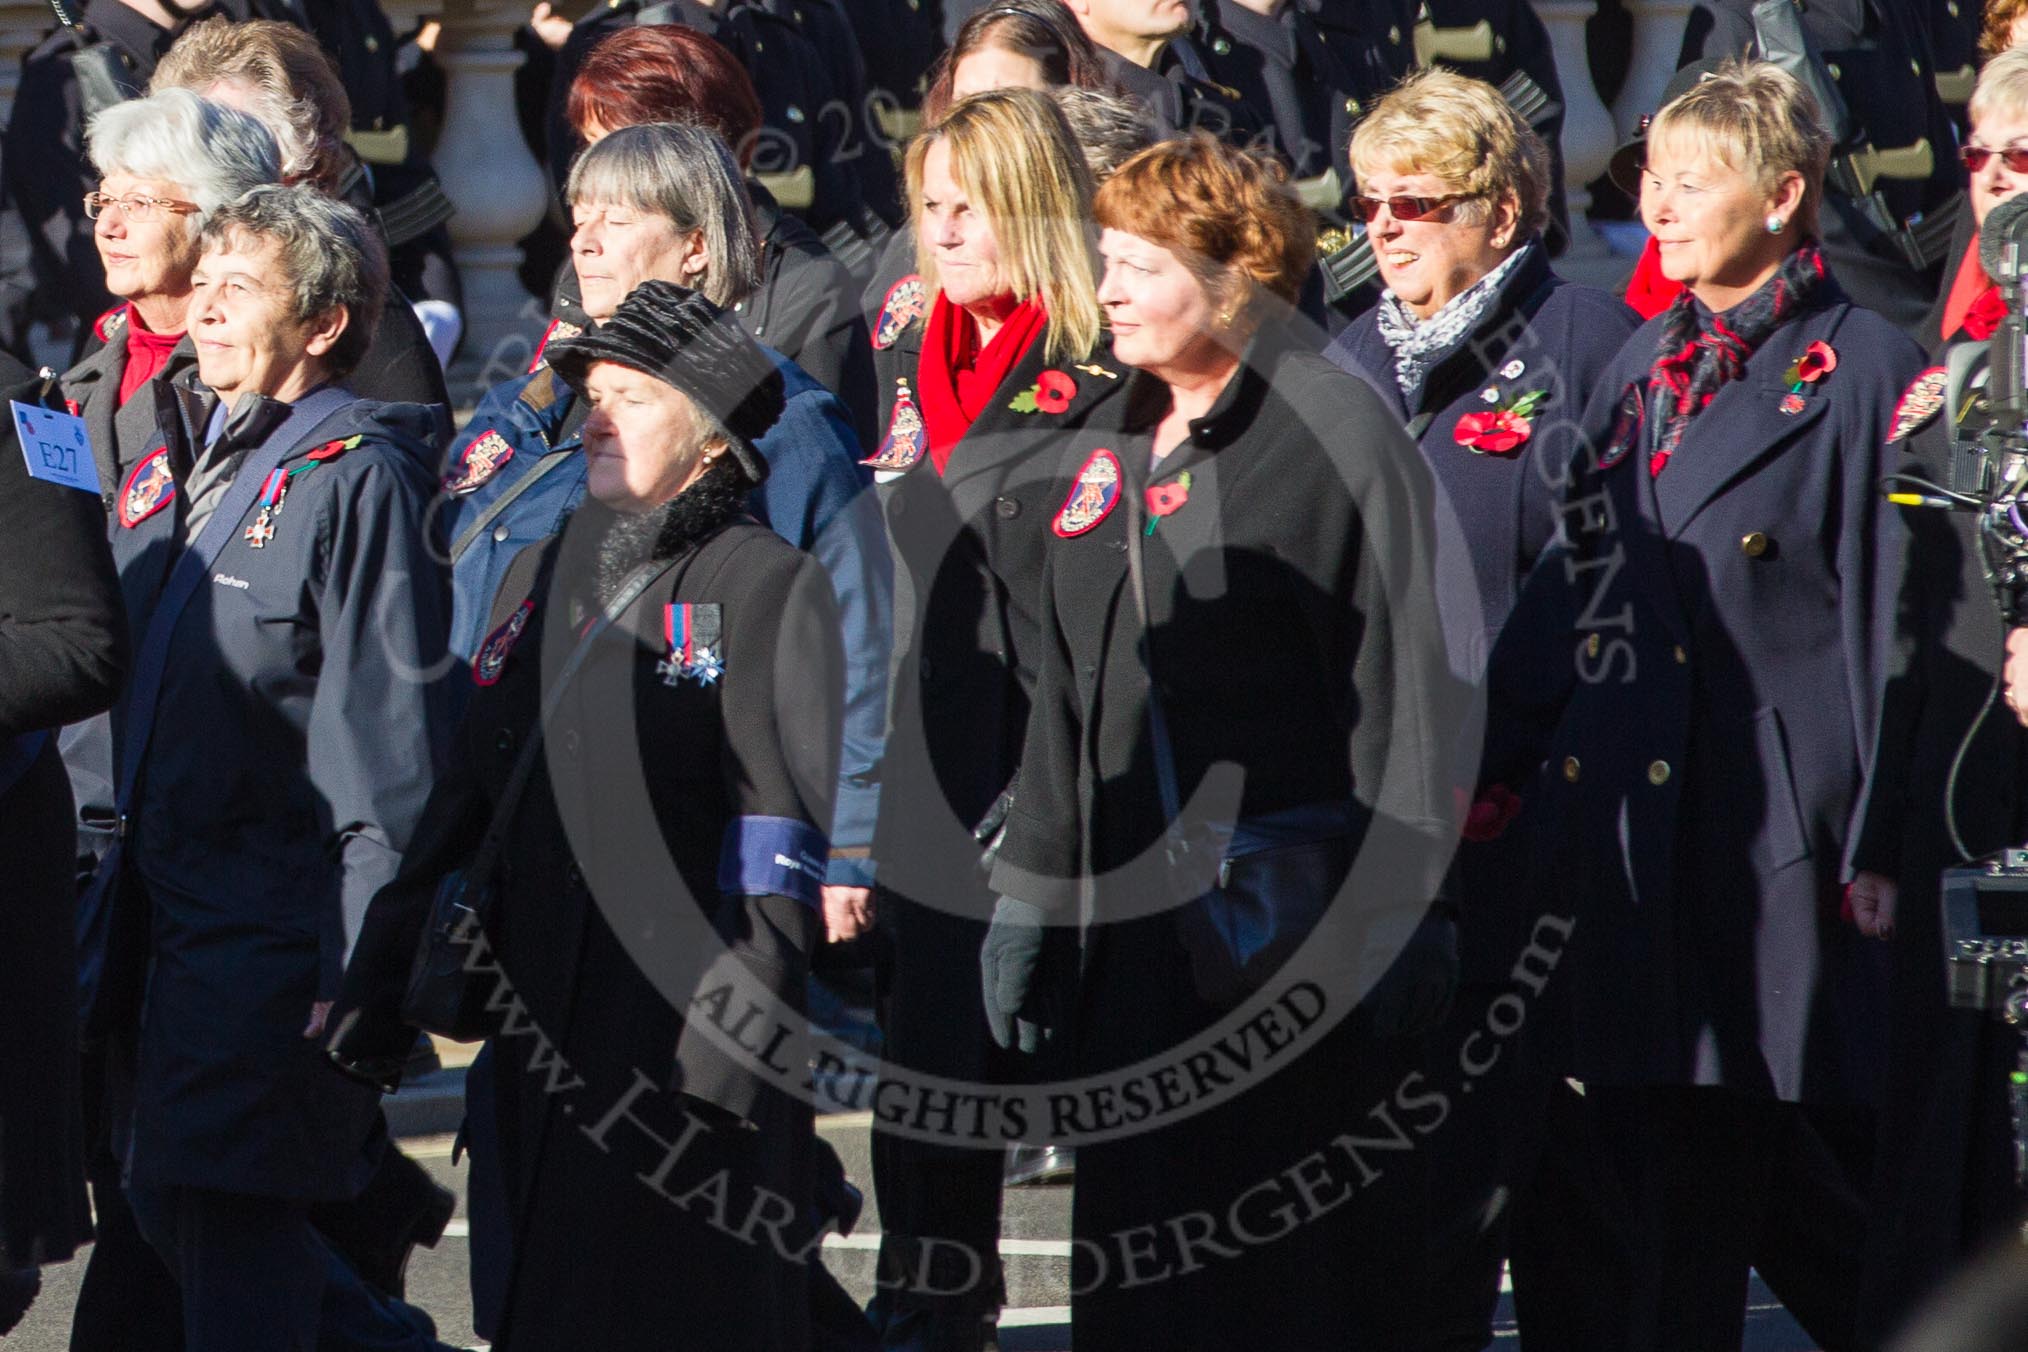 Remembrance Sunday 2012 Cenotaph March Past: Group E27 - Queen Alexandra's Royal Naval Nursing Service..
Whitehall, Cenotaph,
London SW1,

United Kingdom,
on 11 November 2012 at 11:41, image #195